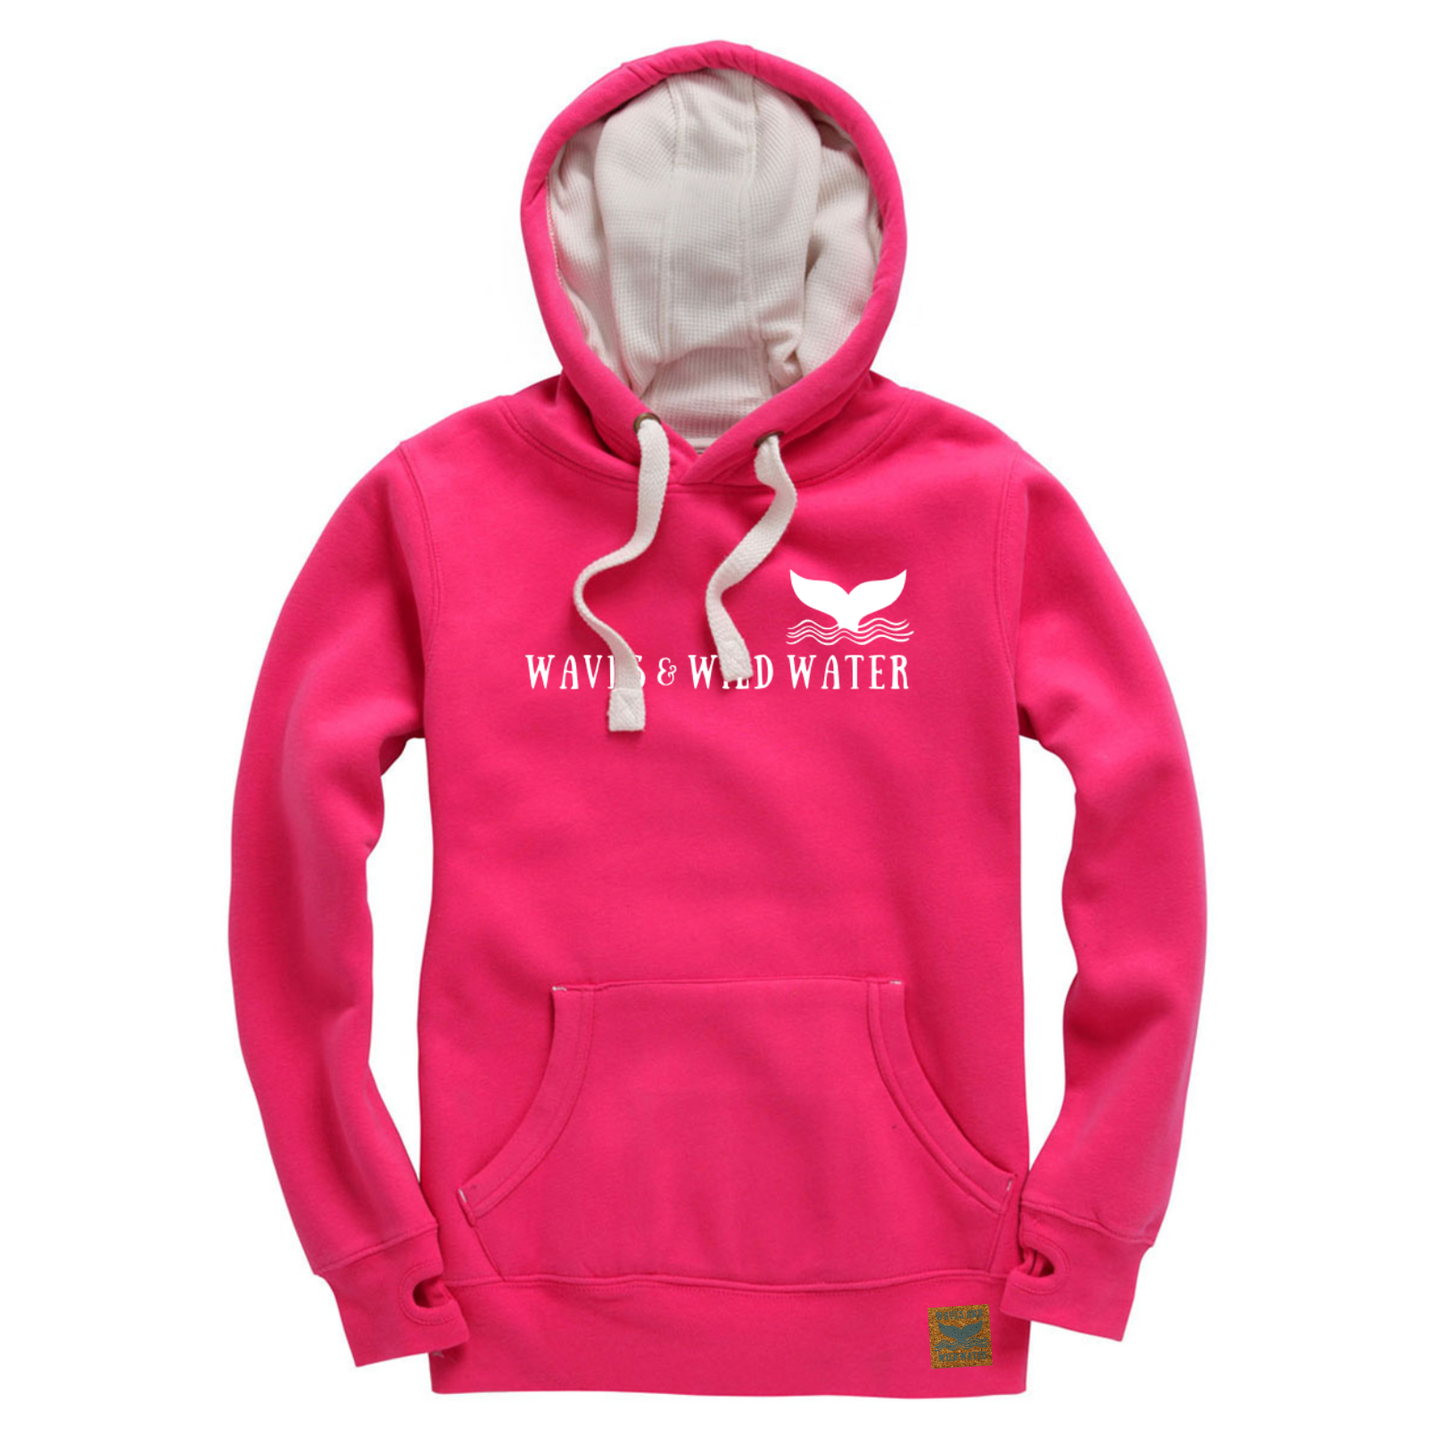 The front of a bright pink hoodie with the Waves & Wild logo printed across the front in white ink.